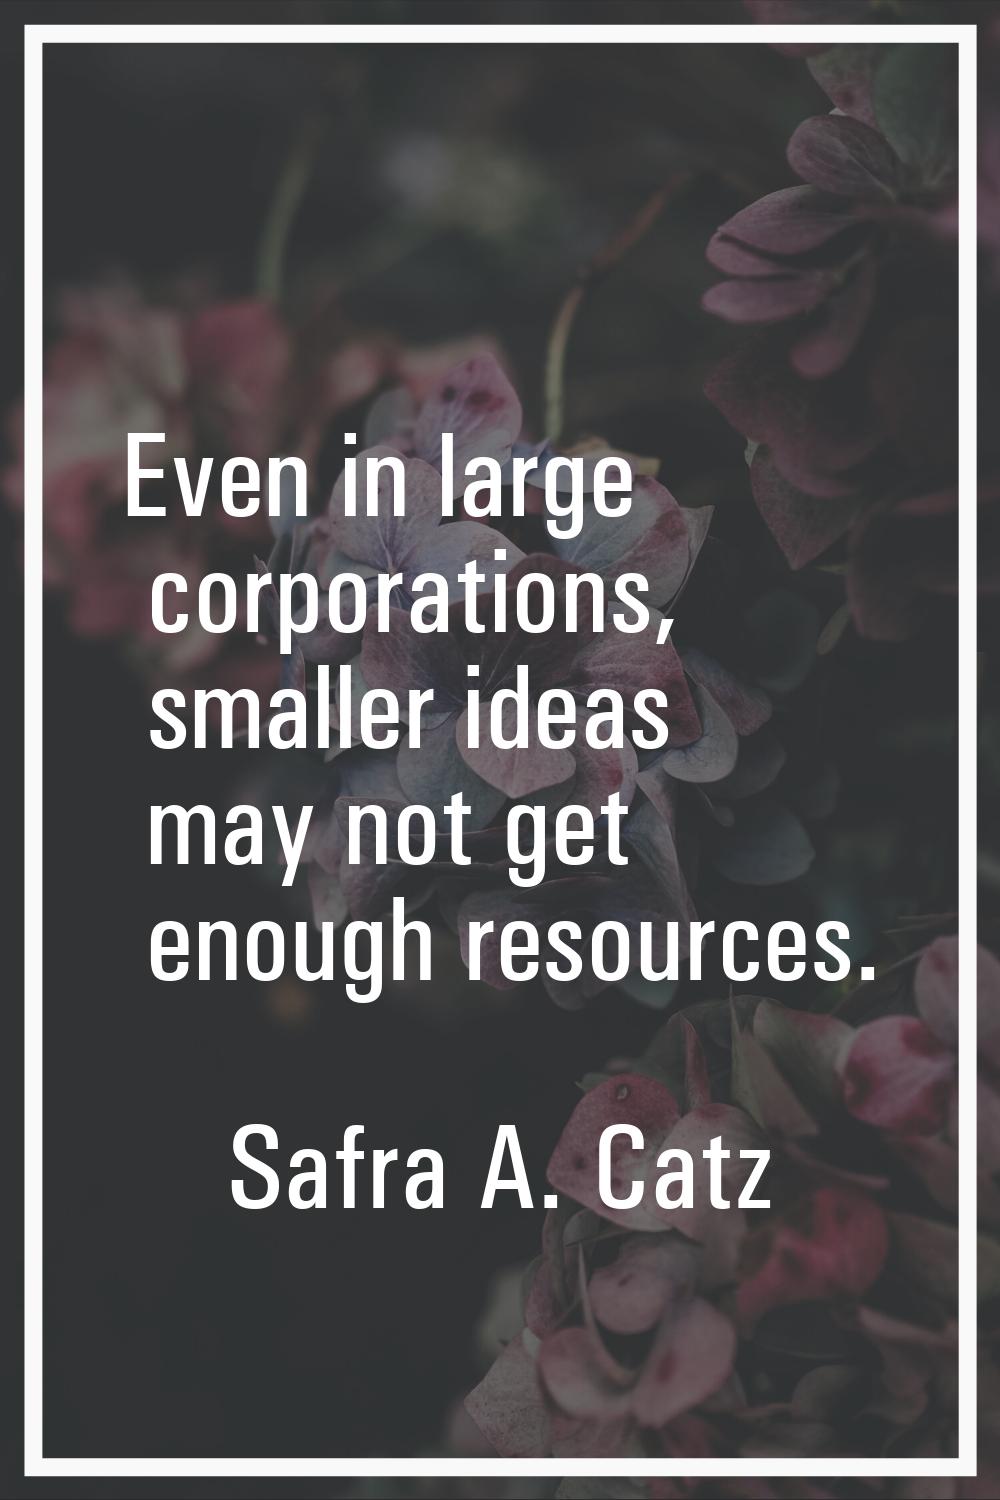 Even in large corporations, smaller ideas may not get enough resources.